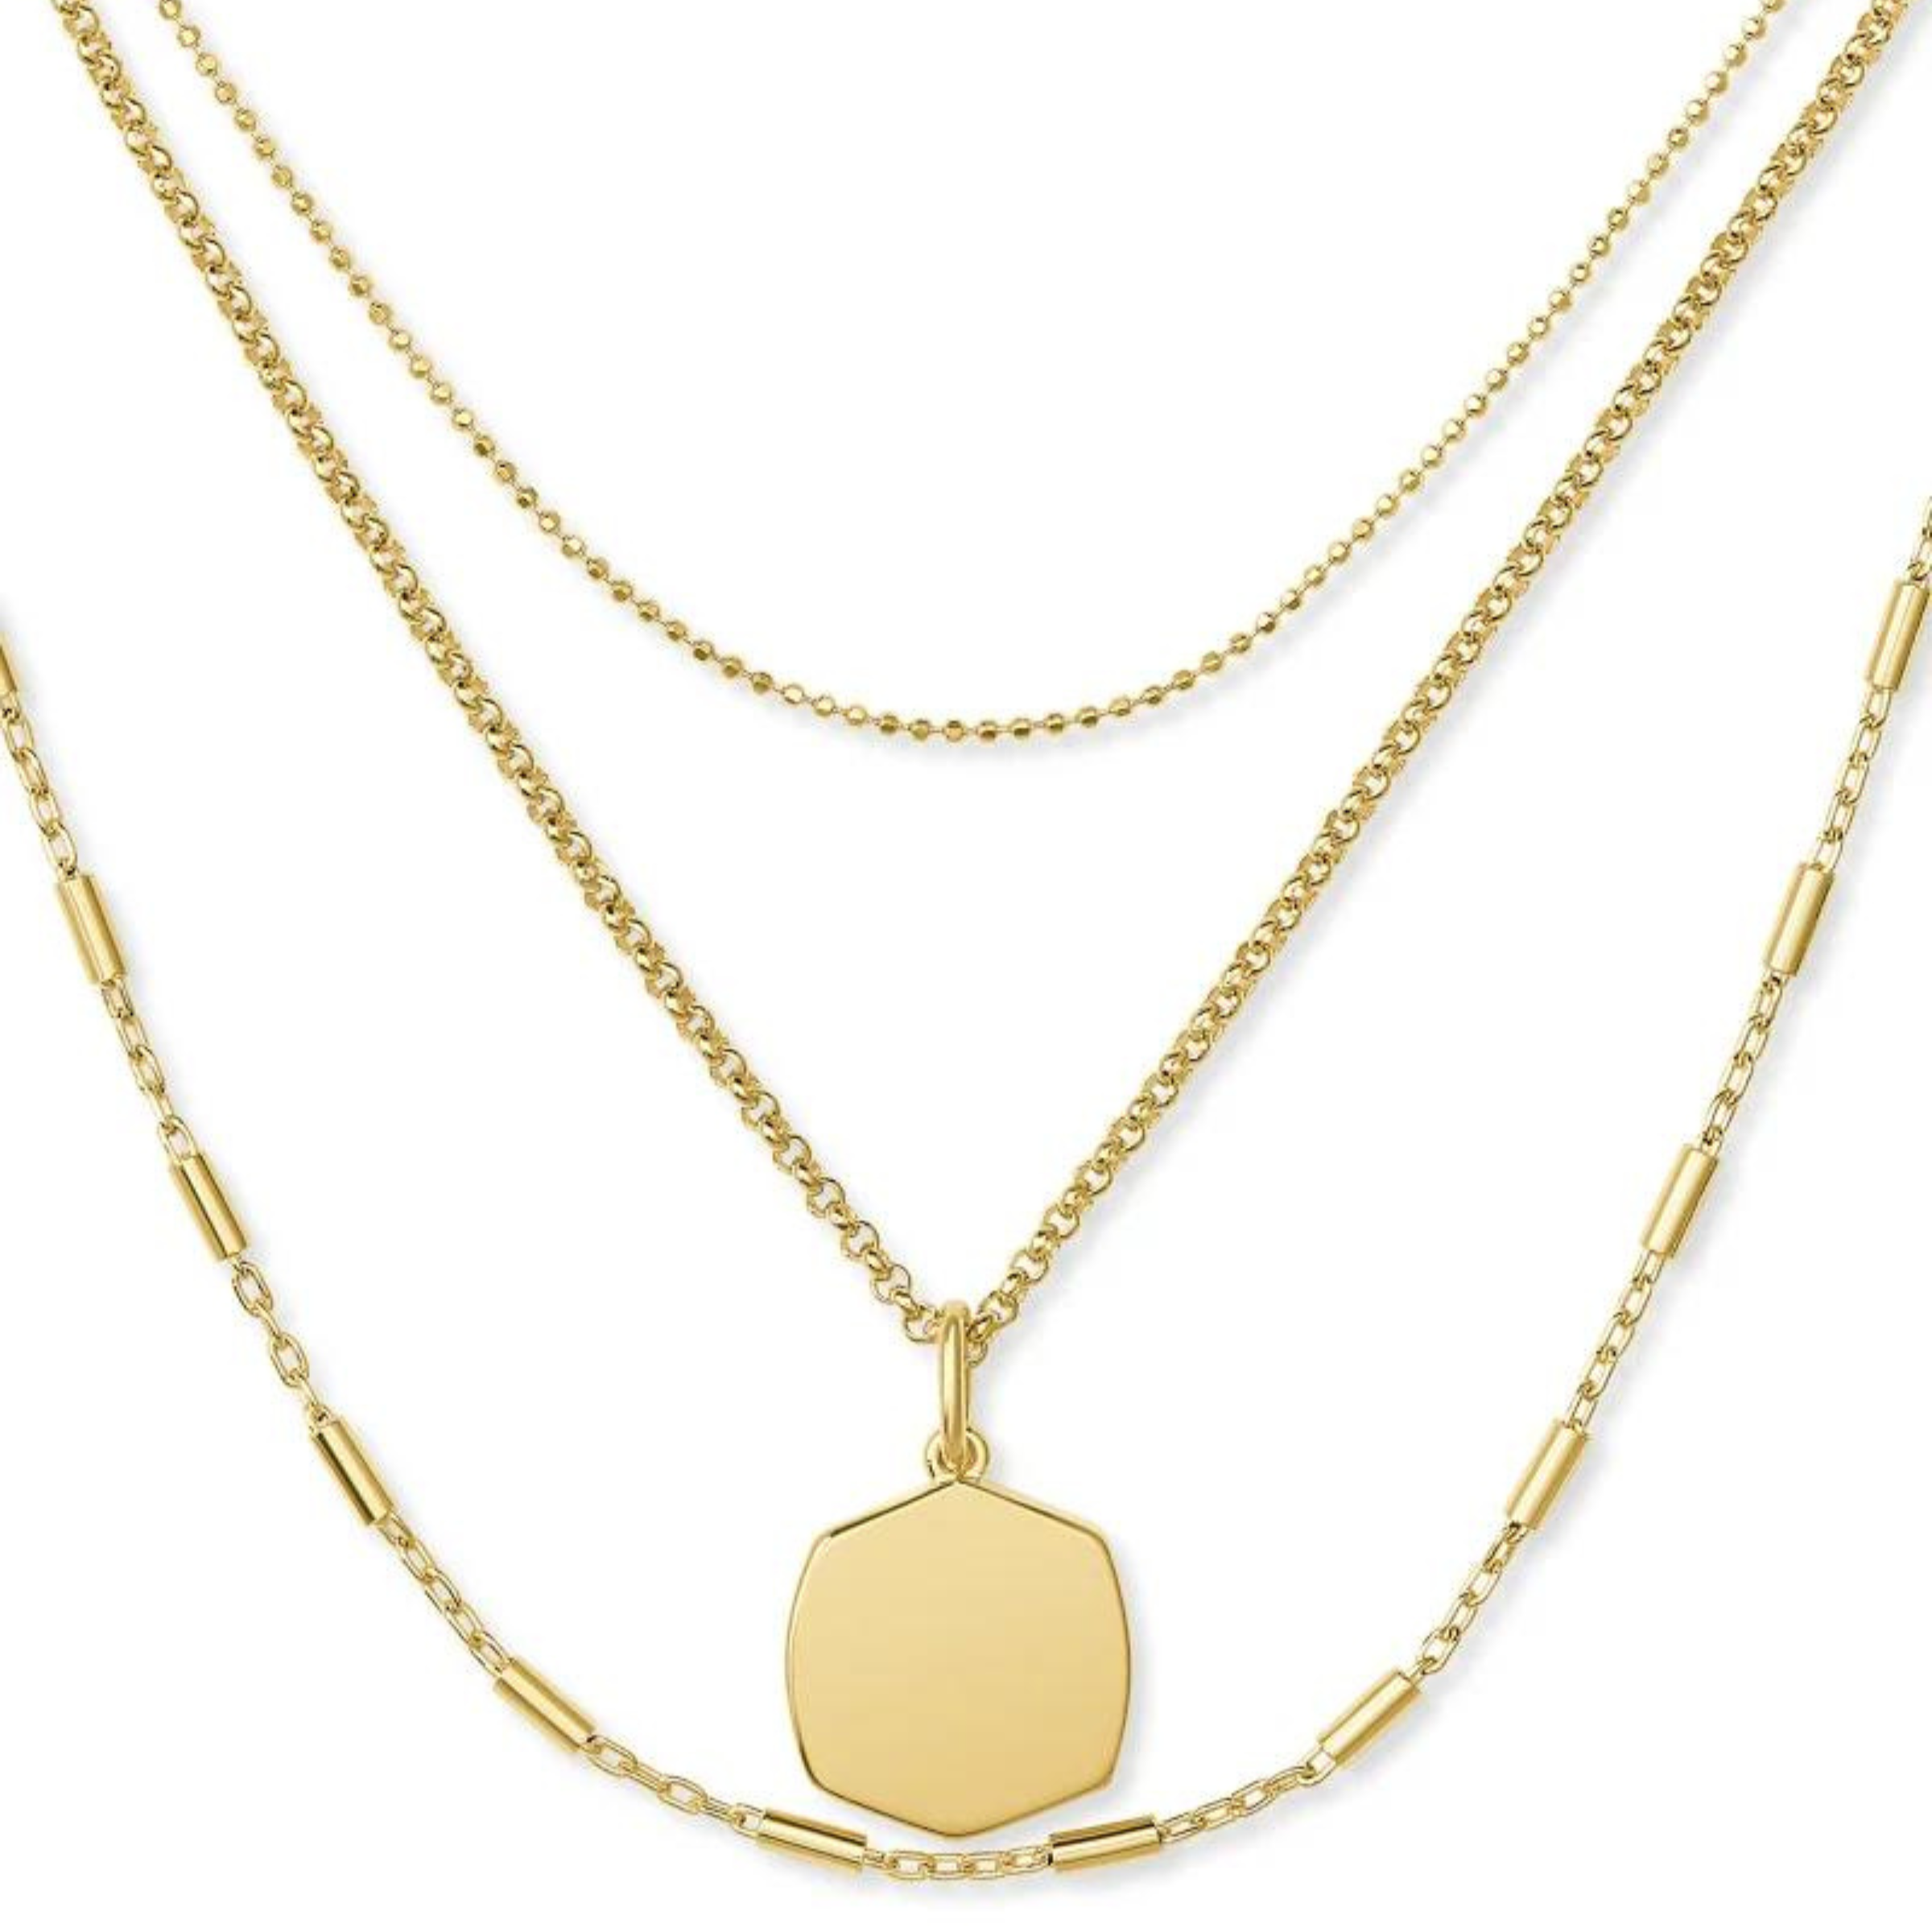 Three strands of gold chains. Each strand is different and the middle strand has a hexgonal shape pendant. This necklace is pictured on a white background. 